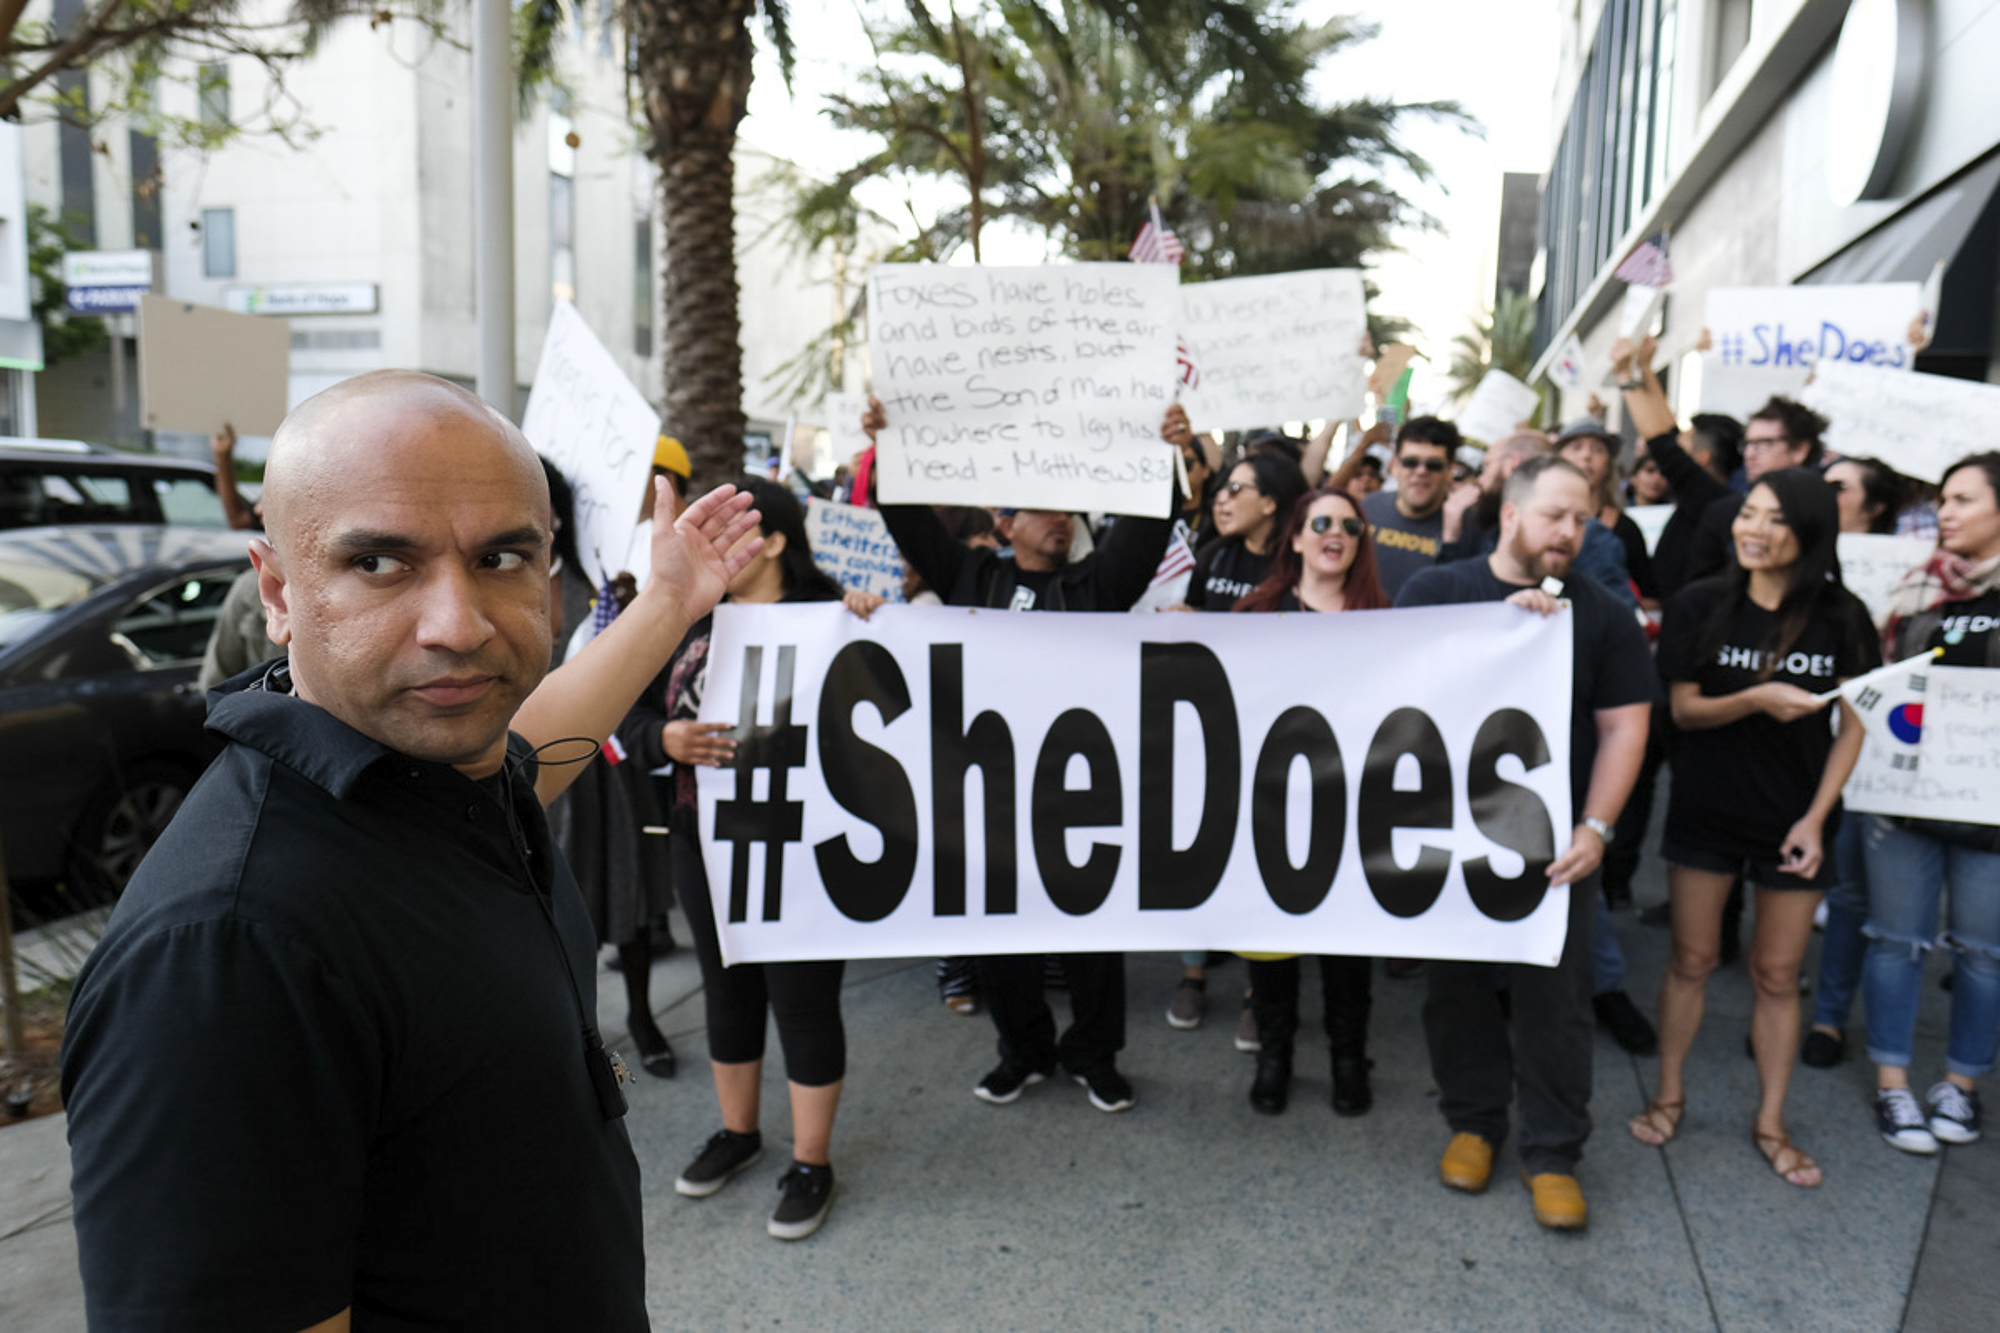  Mel Tillekerantne leads #Shedoes protesters down the streets of Koreatown in Los Angeles, California on May 26, 2018. (Jayrol San Jose/Corsair Contributor) 